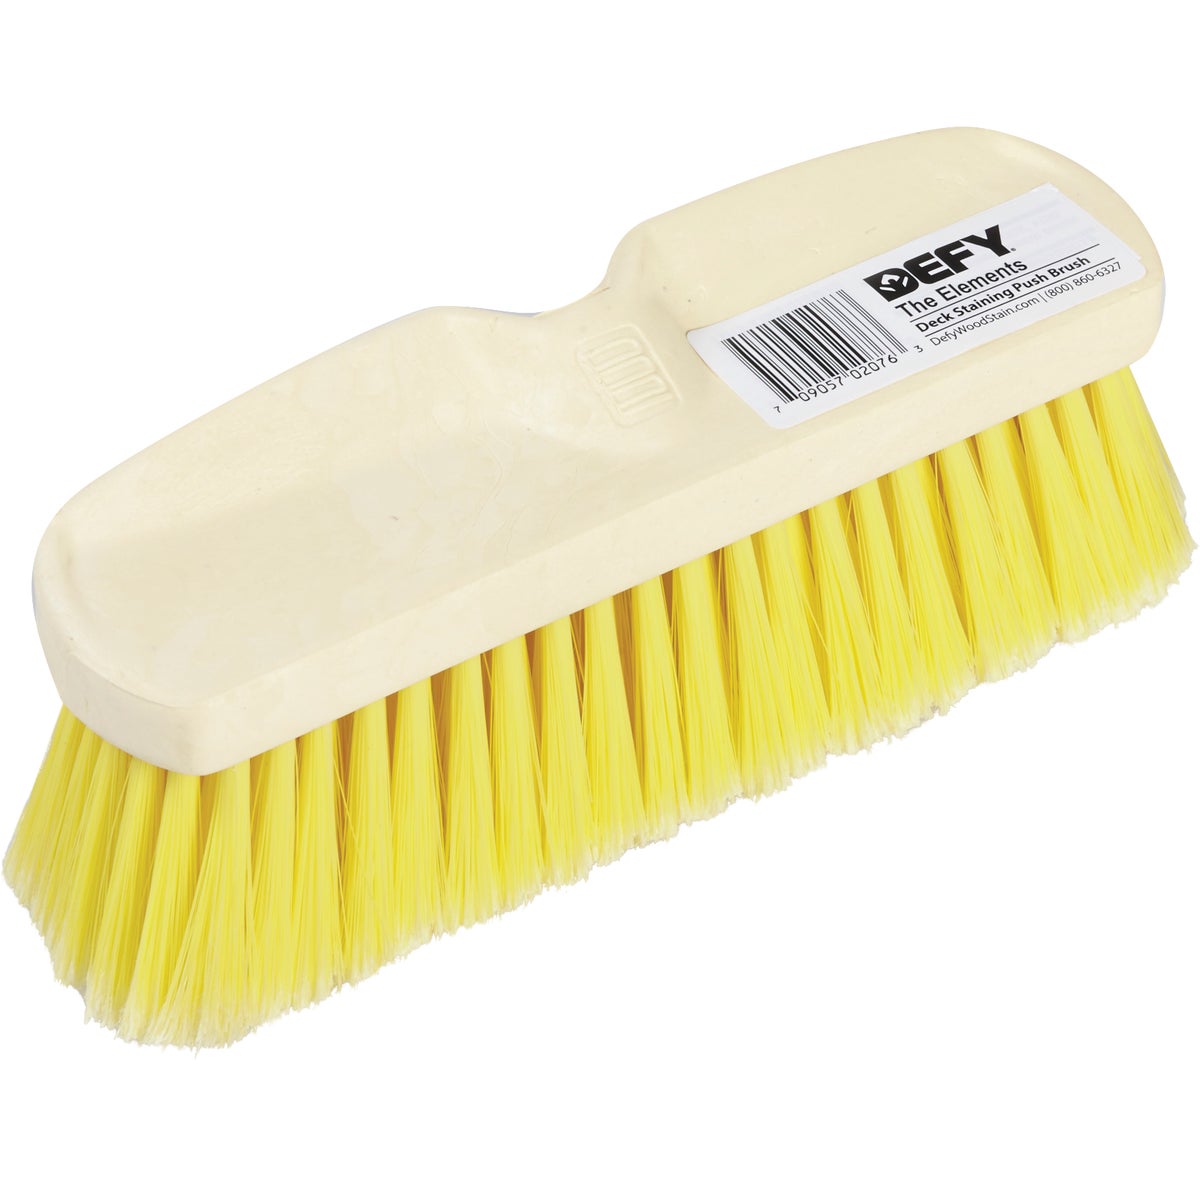 DEFY 10 In. Flagged Deck Staining Push Brush